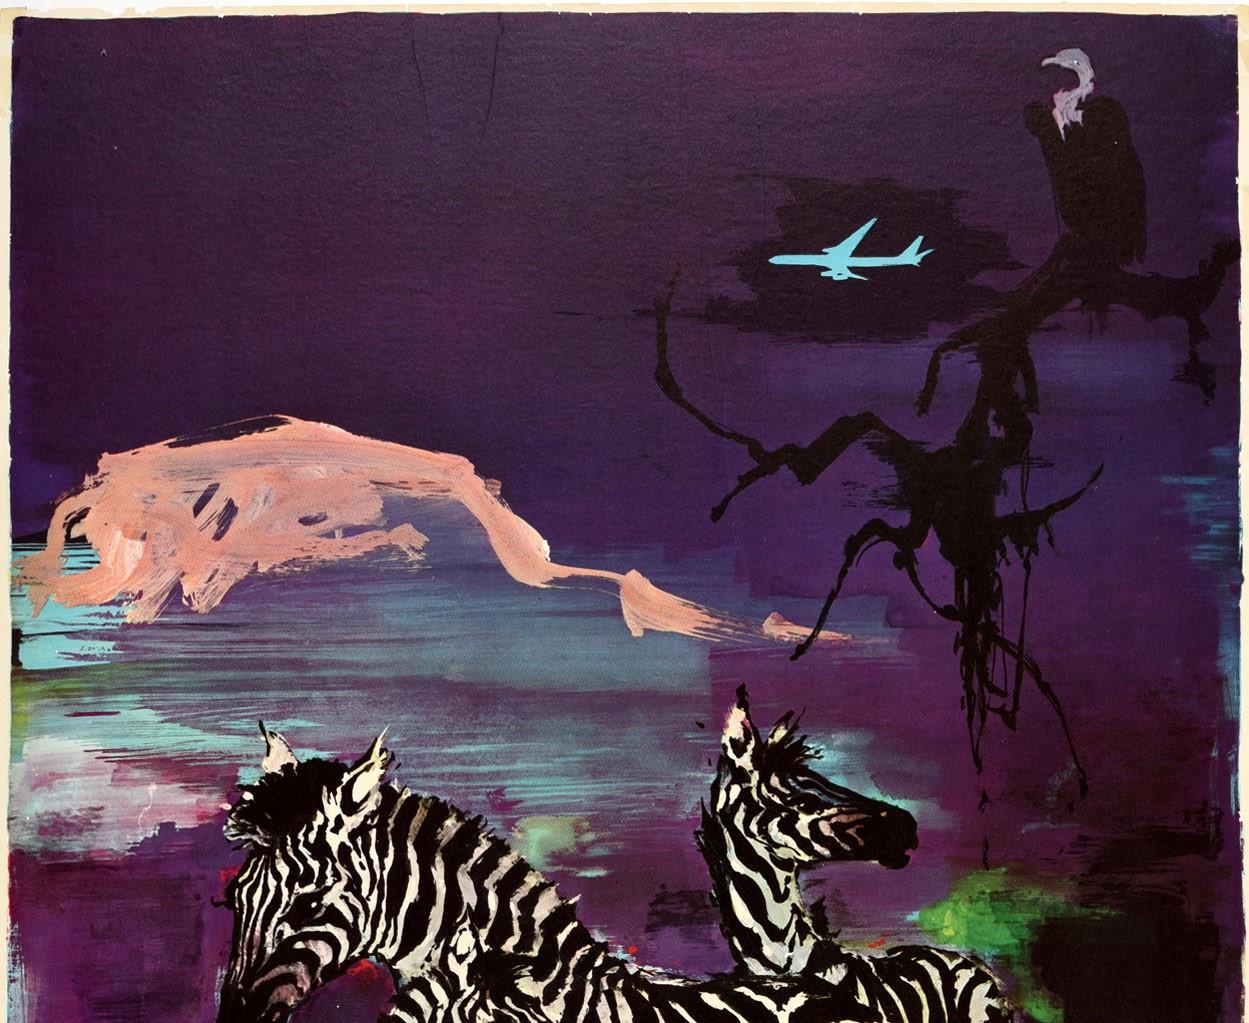 Original vintage travel poster for Africa issued by SAS Scandinavian Airlines System featuring a colourful design by Otto Nielsen (1916-2000) of zebras against a purple night sky with a vulture sitting on a tree branch and a plane flying over a